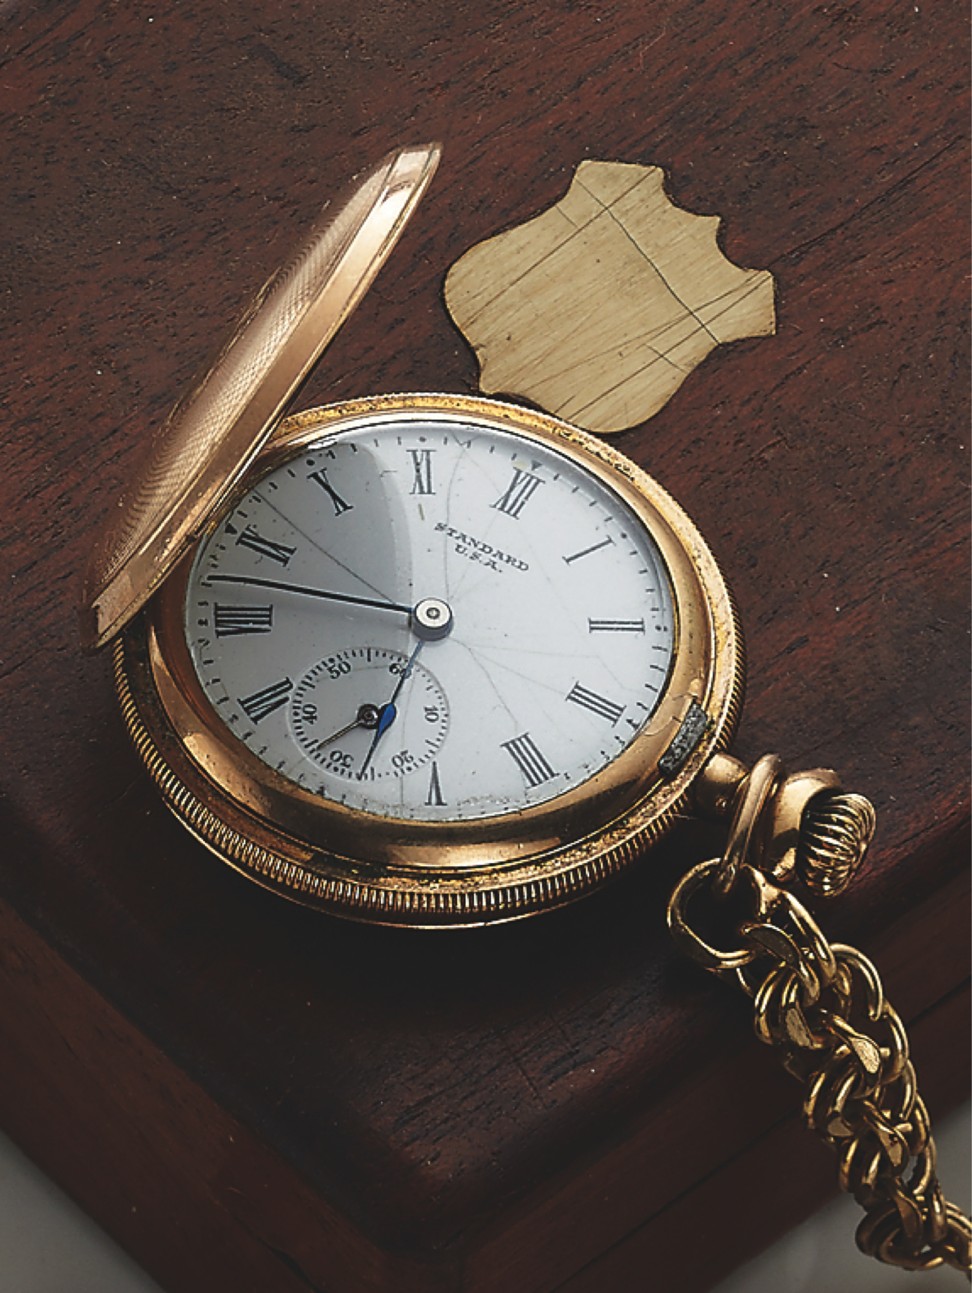 James Dean’s pocket watch, which was made by Standard USA in about 1889.